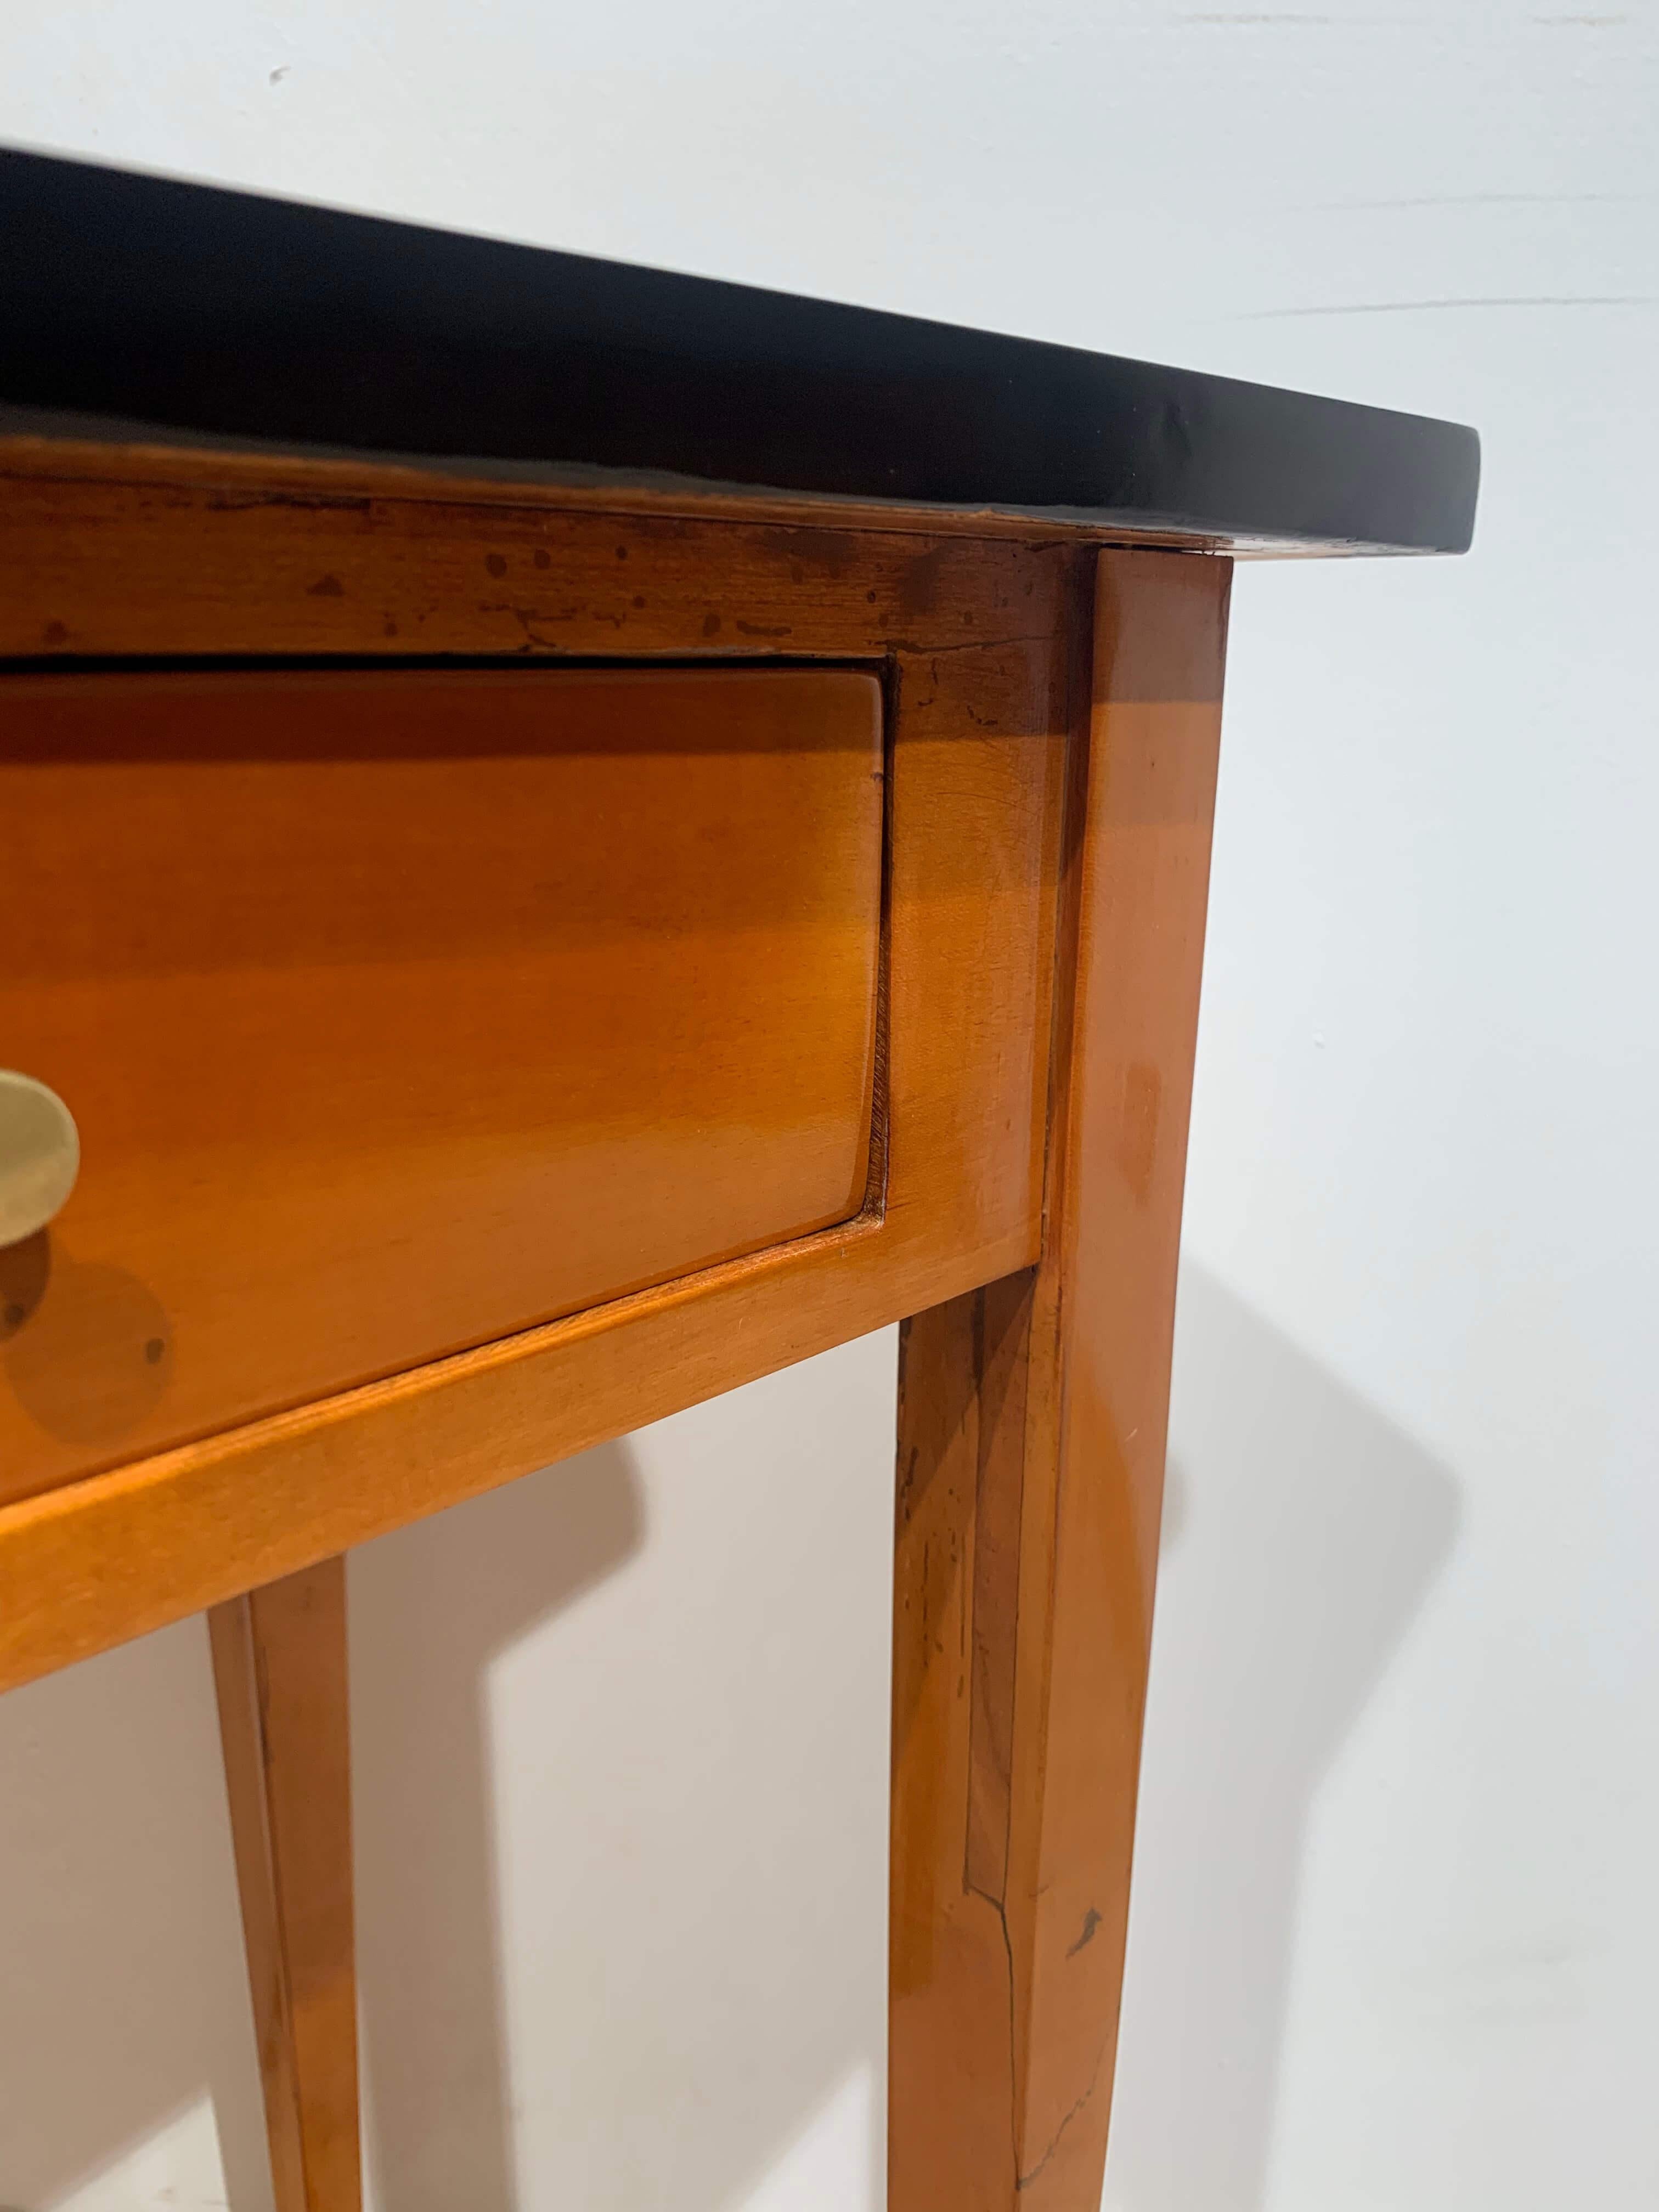 Biedermeier Side Table with Drawer, Cherry Wood, South Germany, circa 1830 3